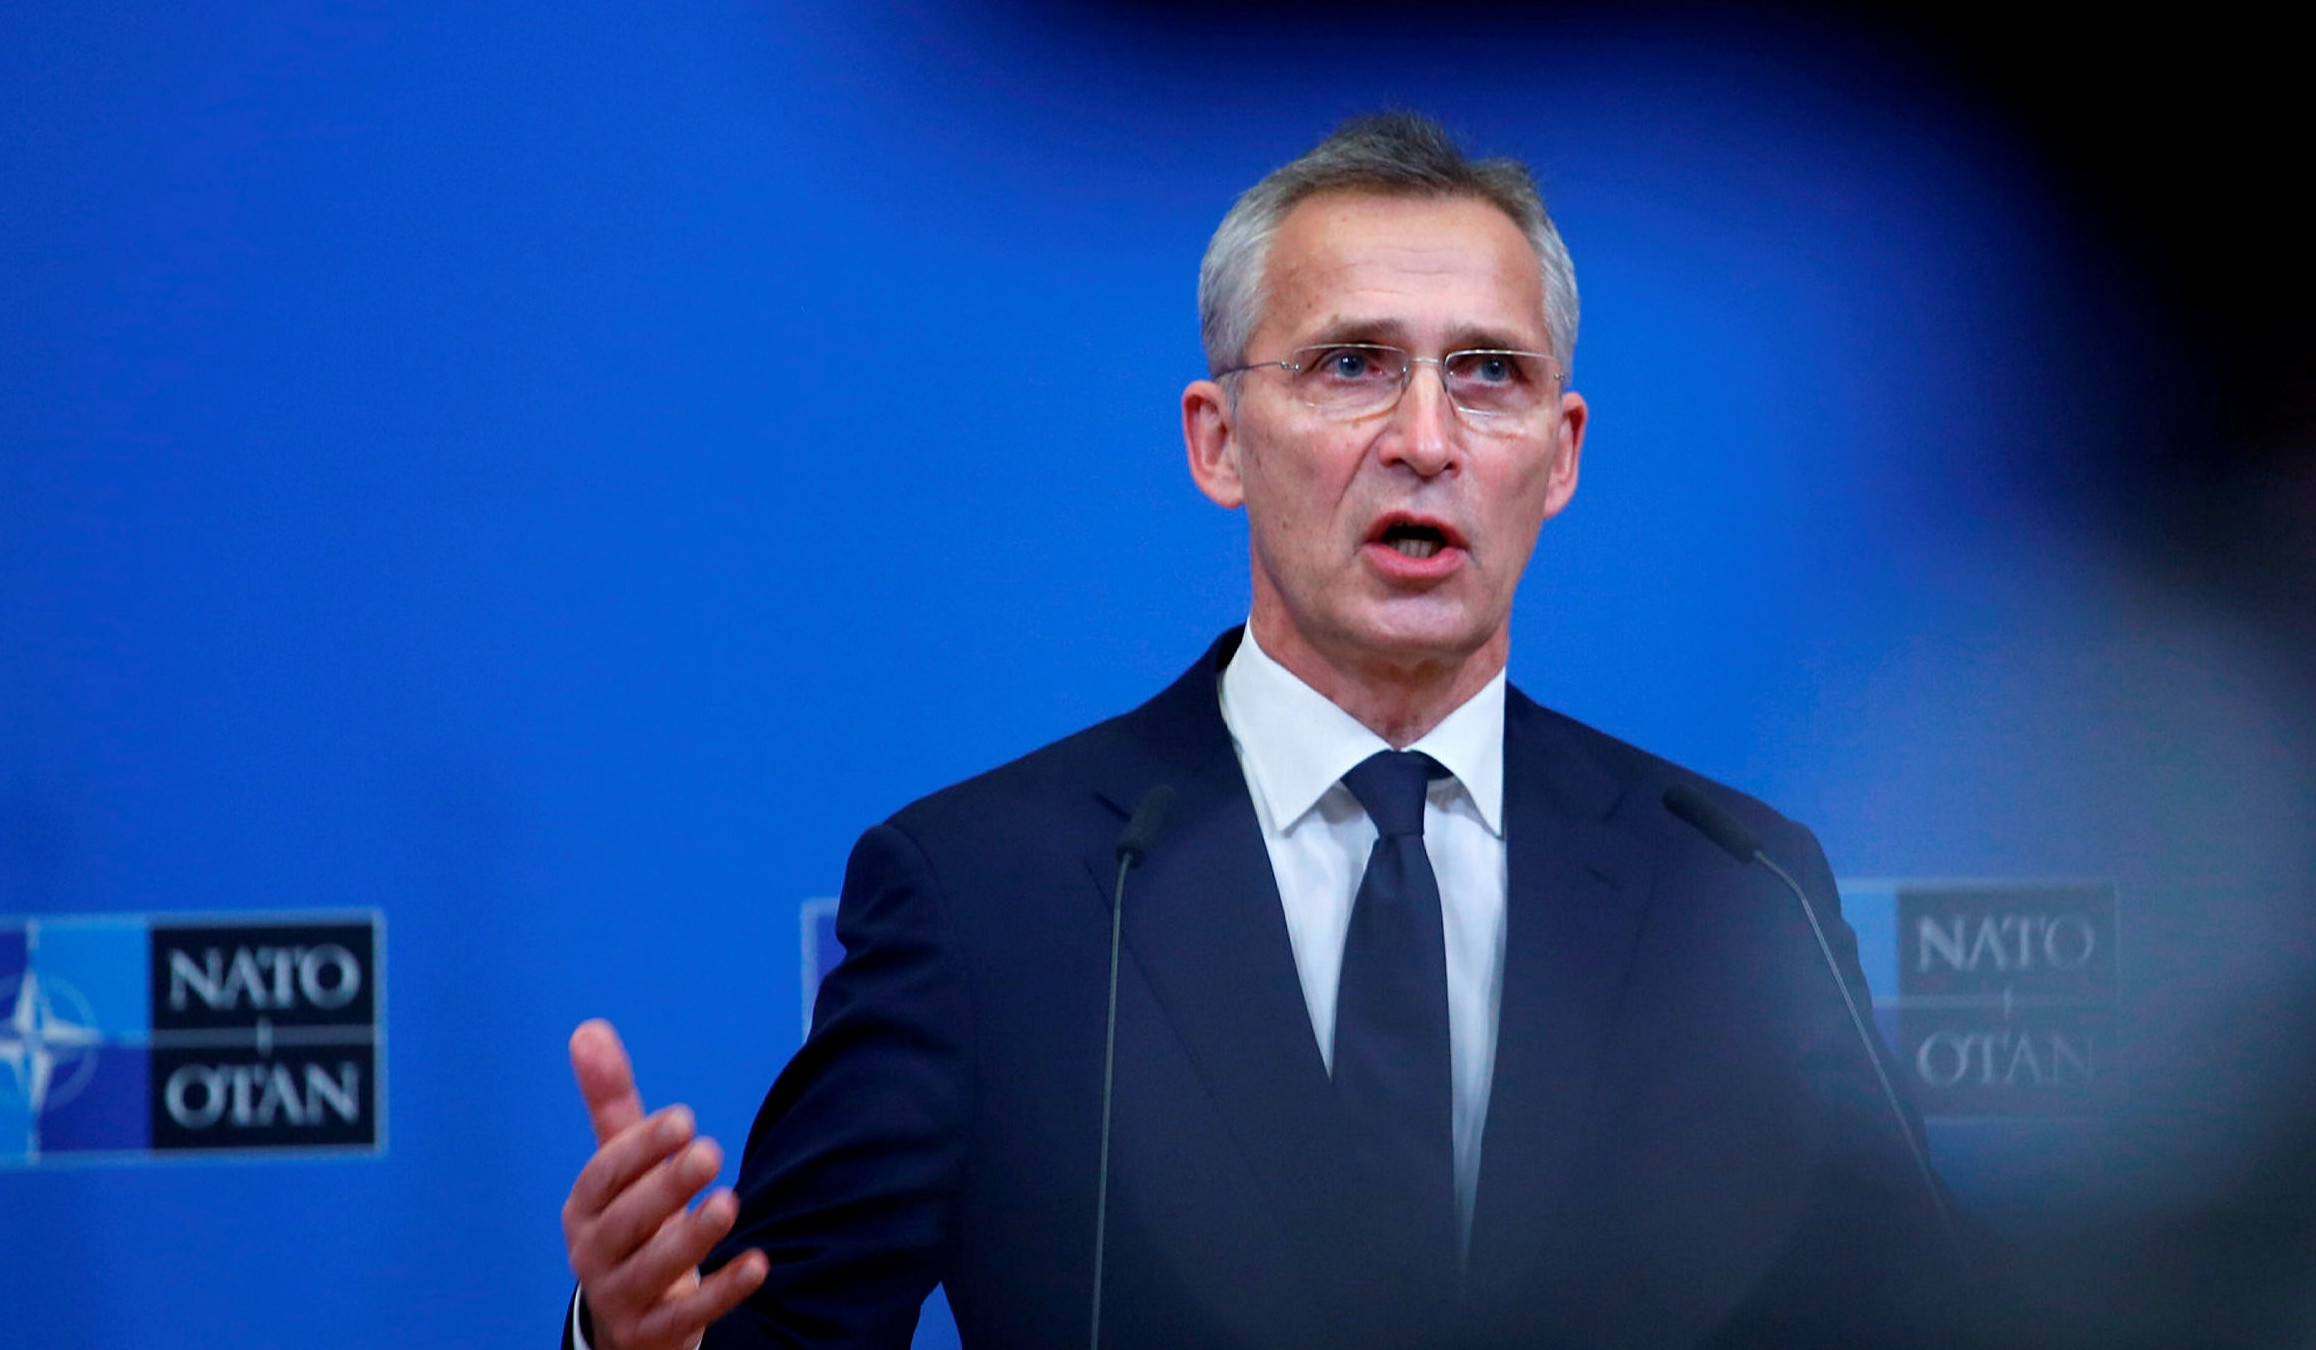 NATO Secretary General says Russian-Chinese cooperation in the Arctic is a challenge to the values of the alliance